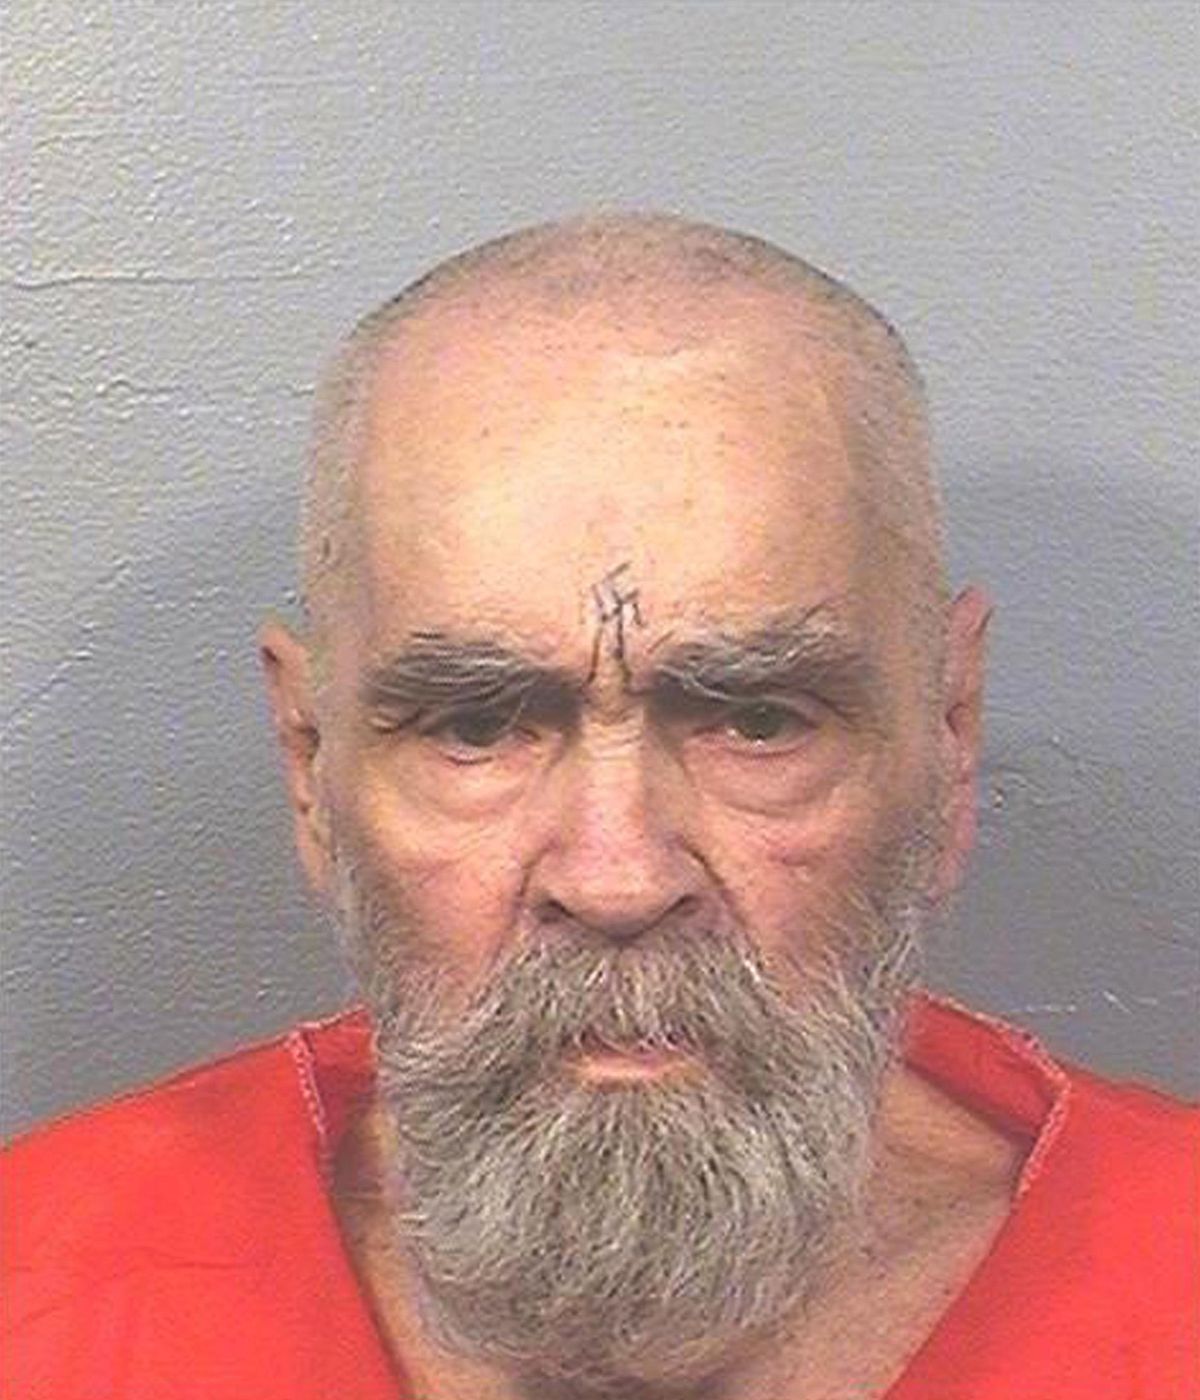 This Aug. 14, 2017, photo provided by the California Department of Corrections and Rehabilitation shows Charles Manson. A spokeswoman for the California Department of Corrections and Rehabilitation says the 83-year-old mass killer is alive Thursday, Nov. 16, 2017. (Uncredited / California Department of Corrections and Rehabilitation)